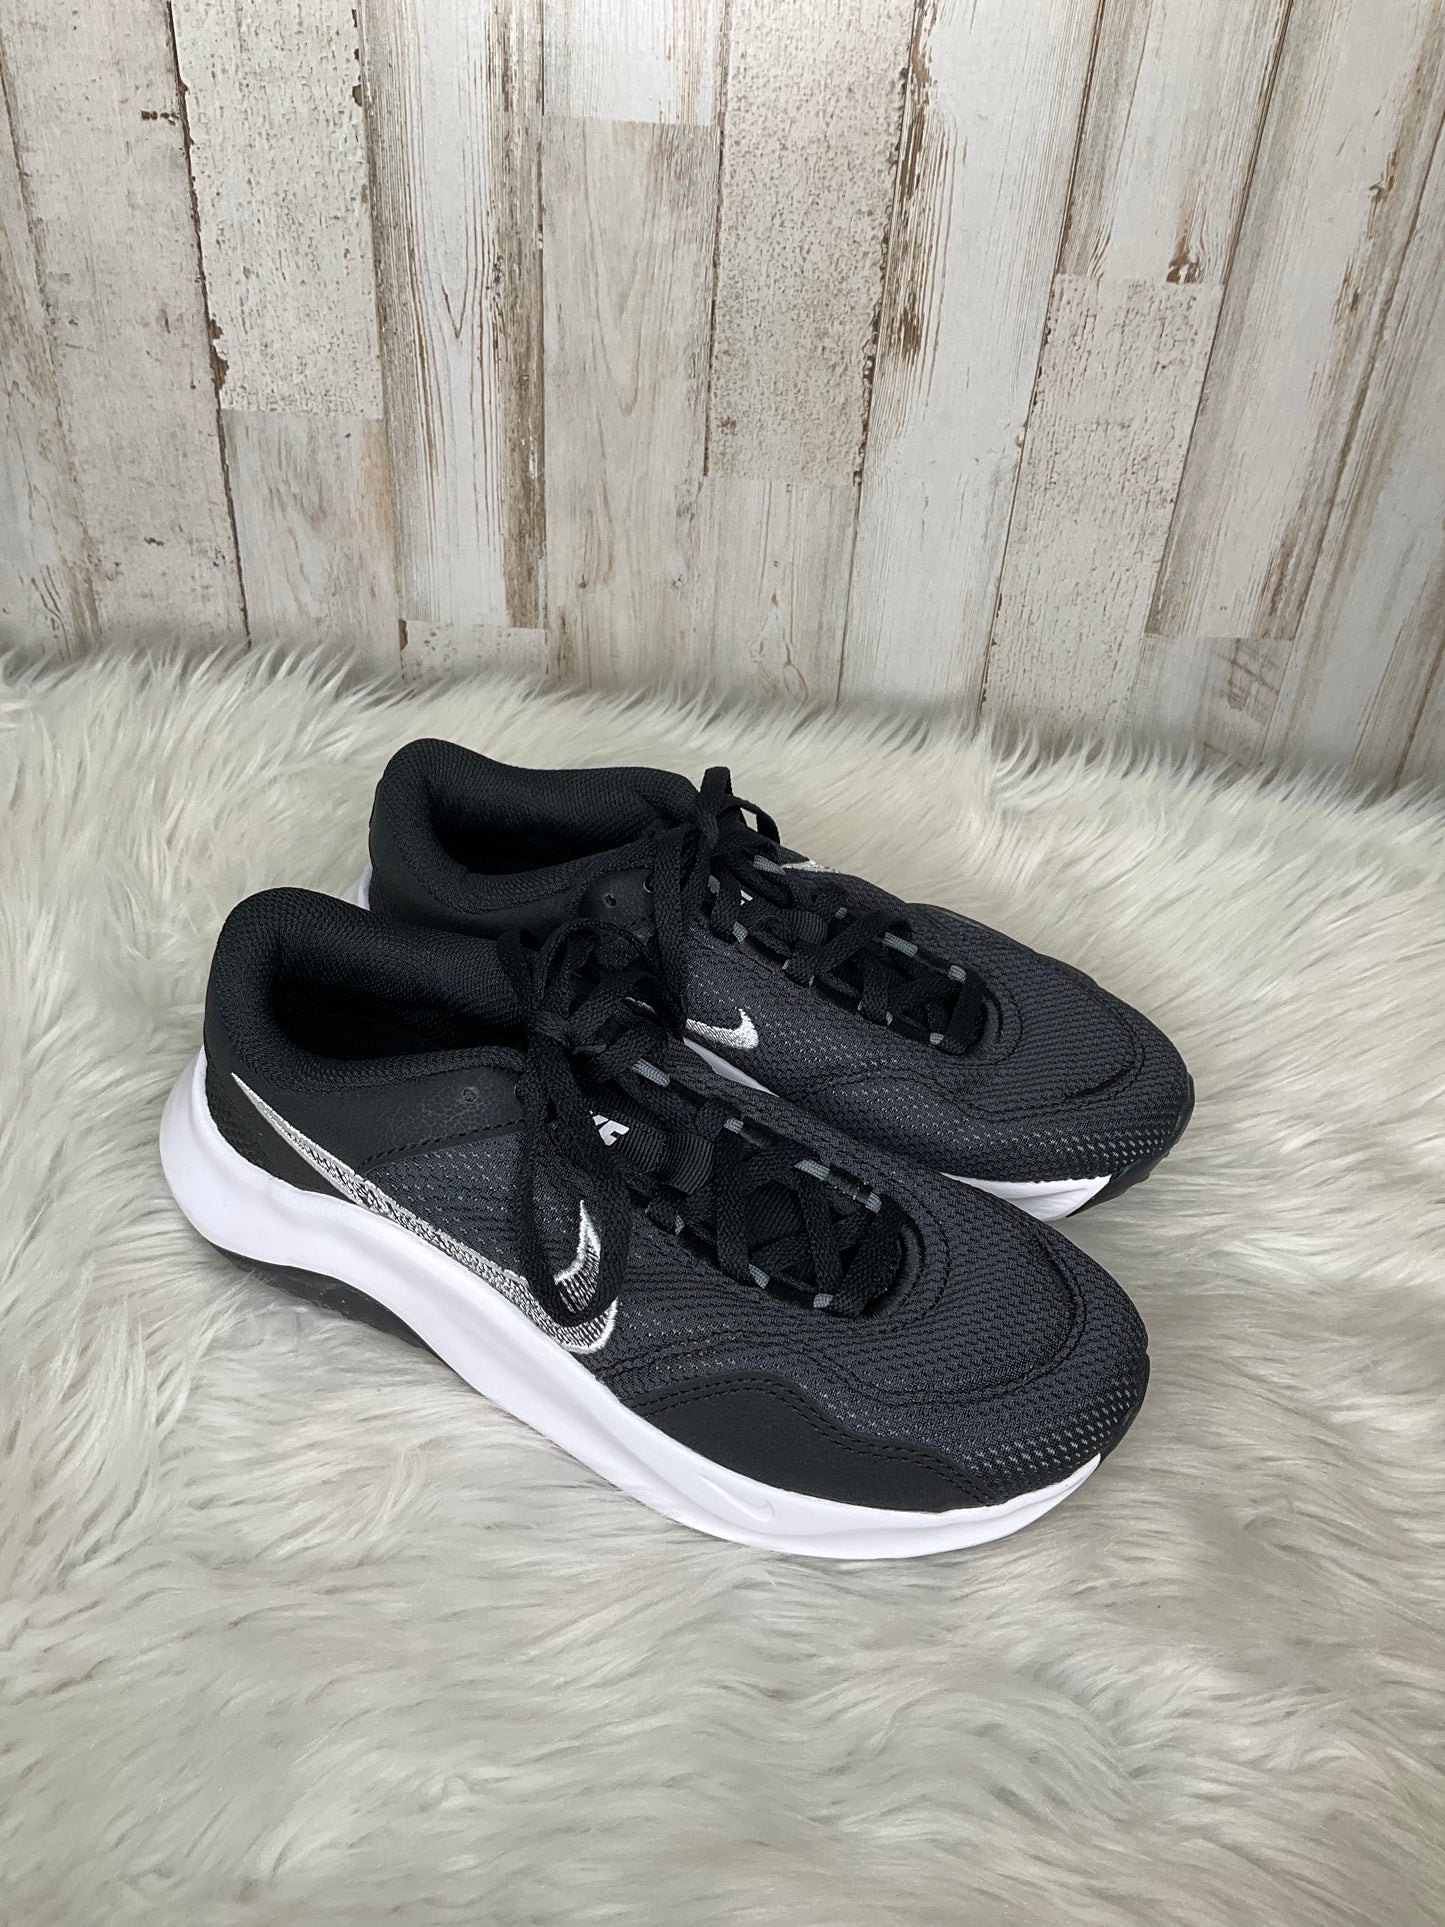 Shoes Athletic By Nike  Size: 5